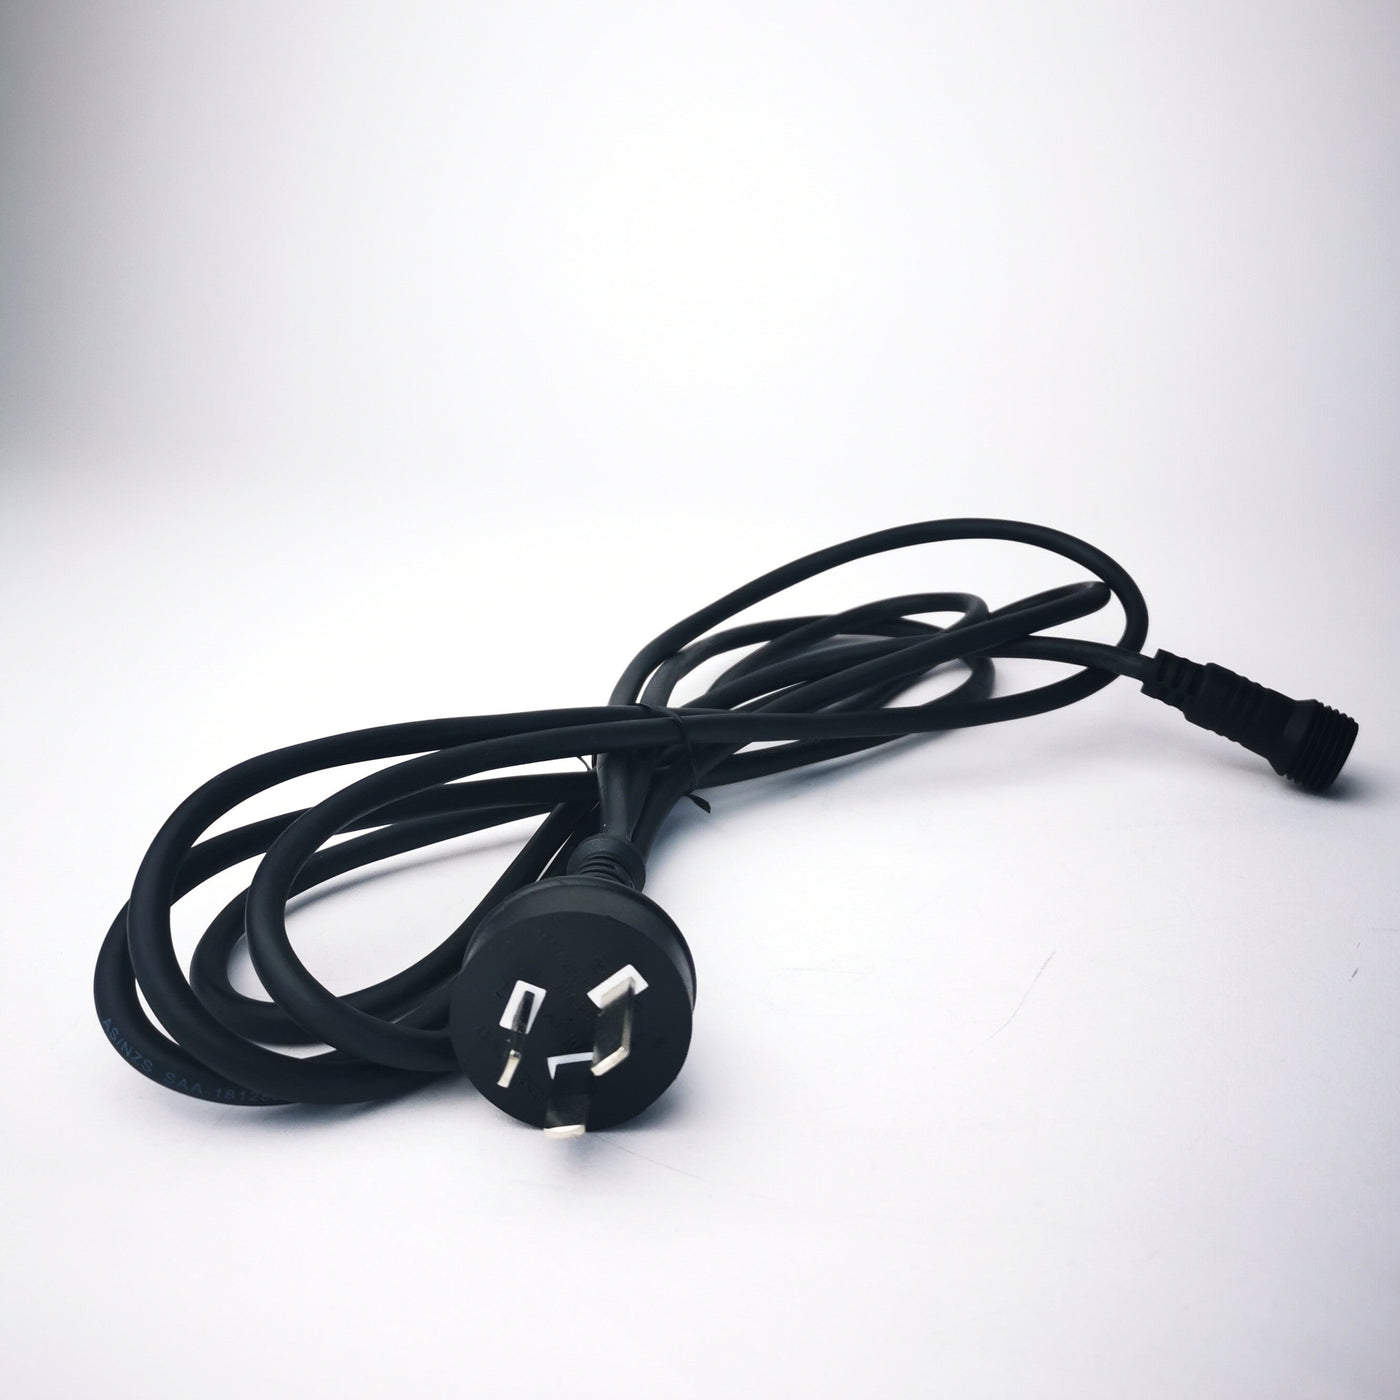 5m Black Festoon Extension Cable with Plug